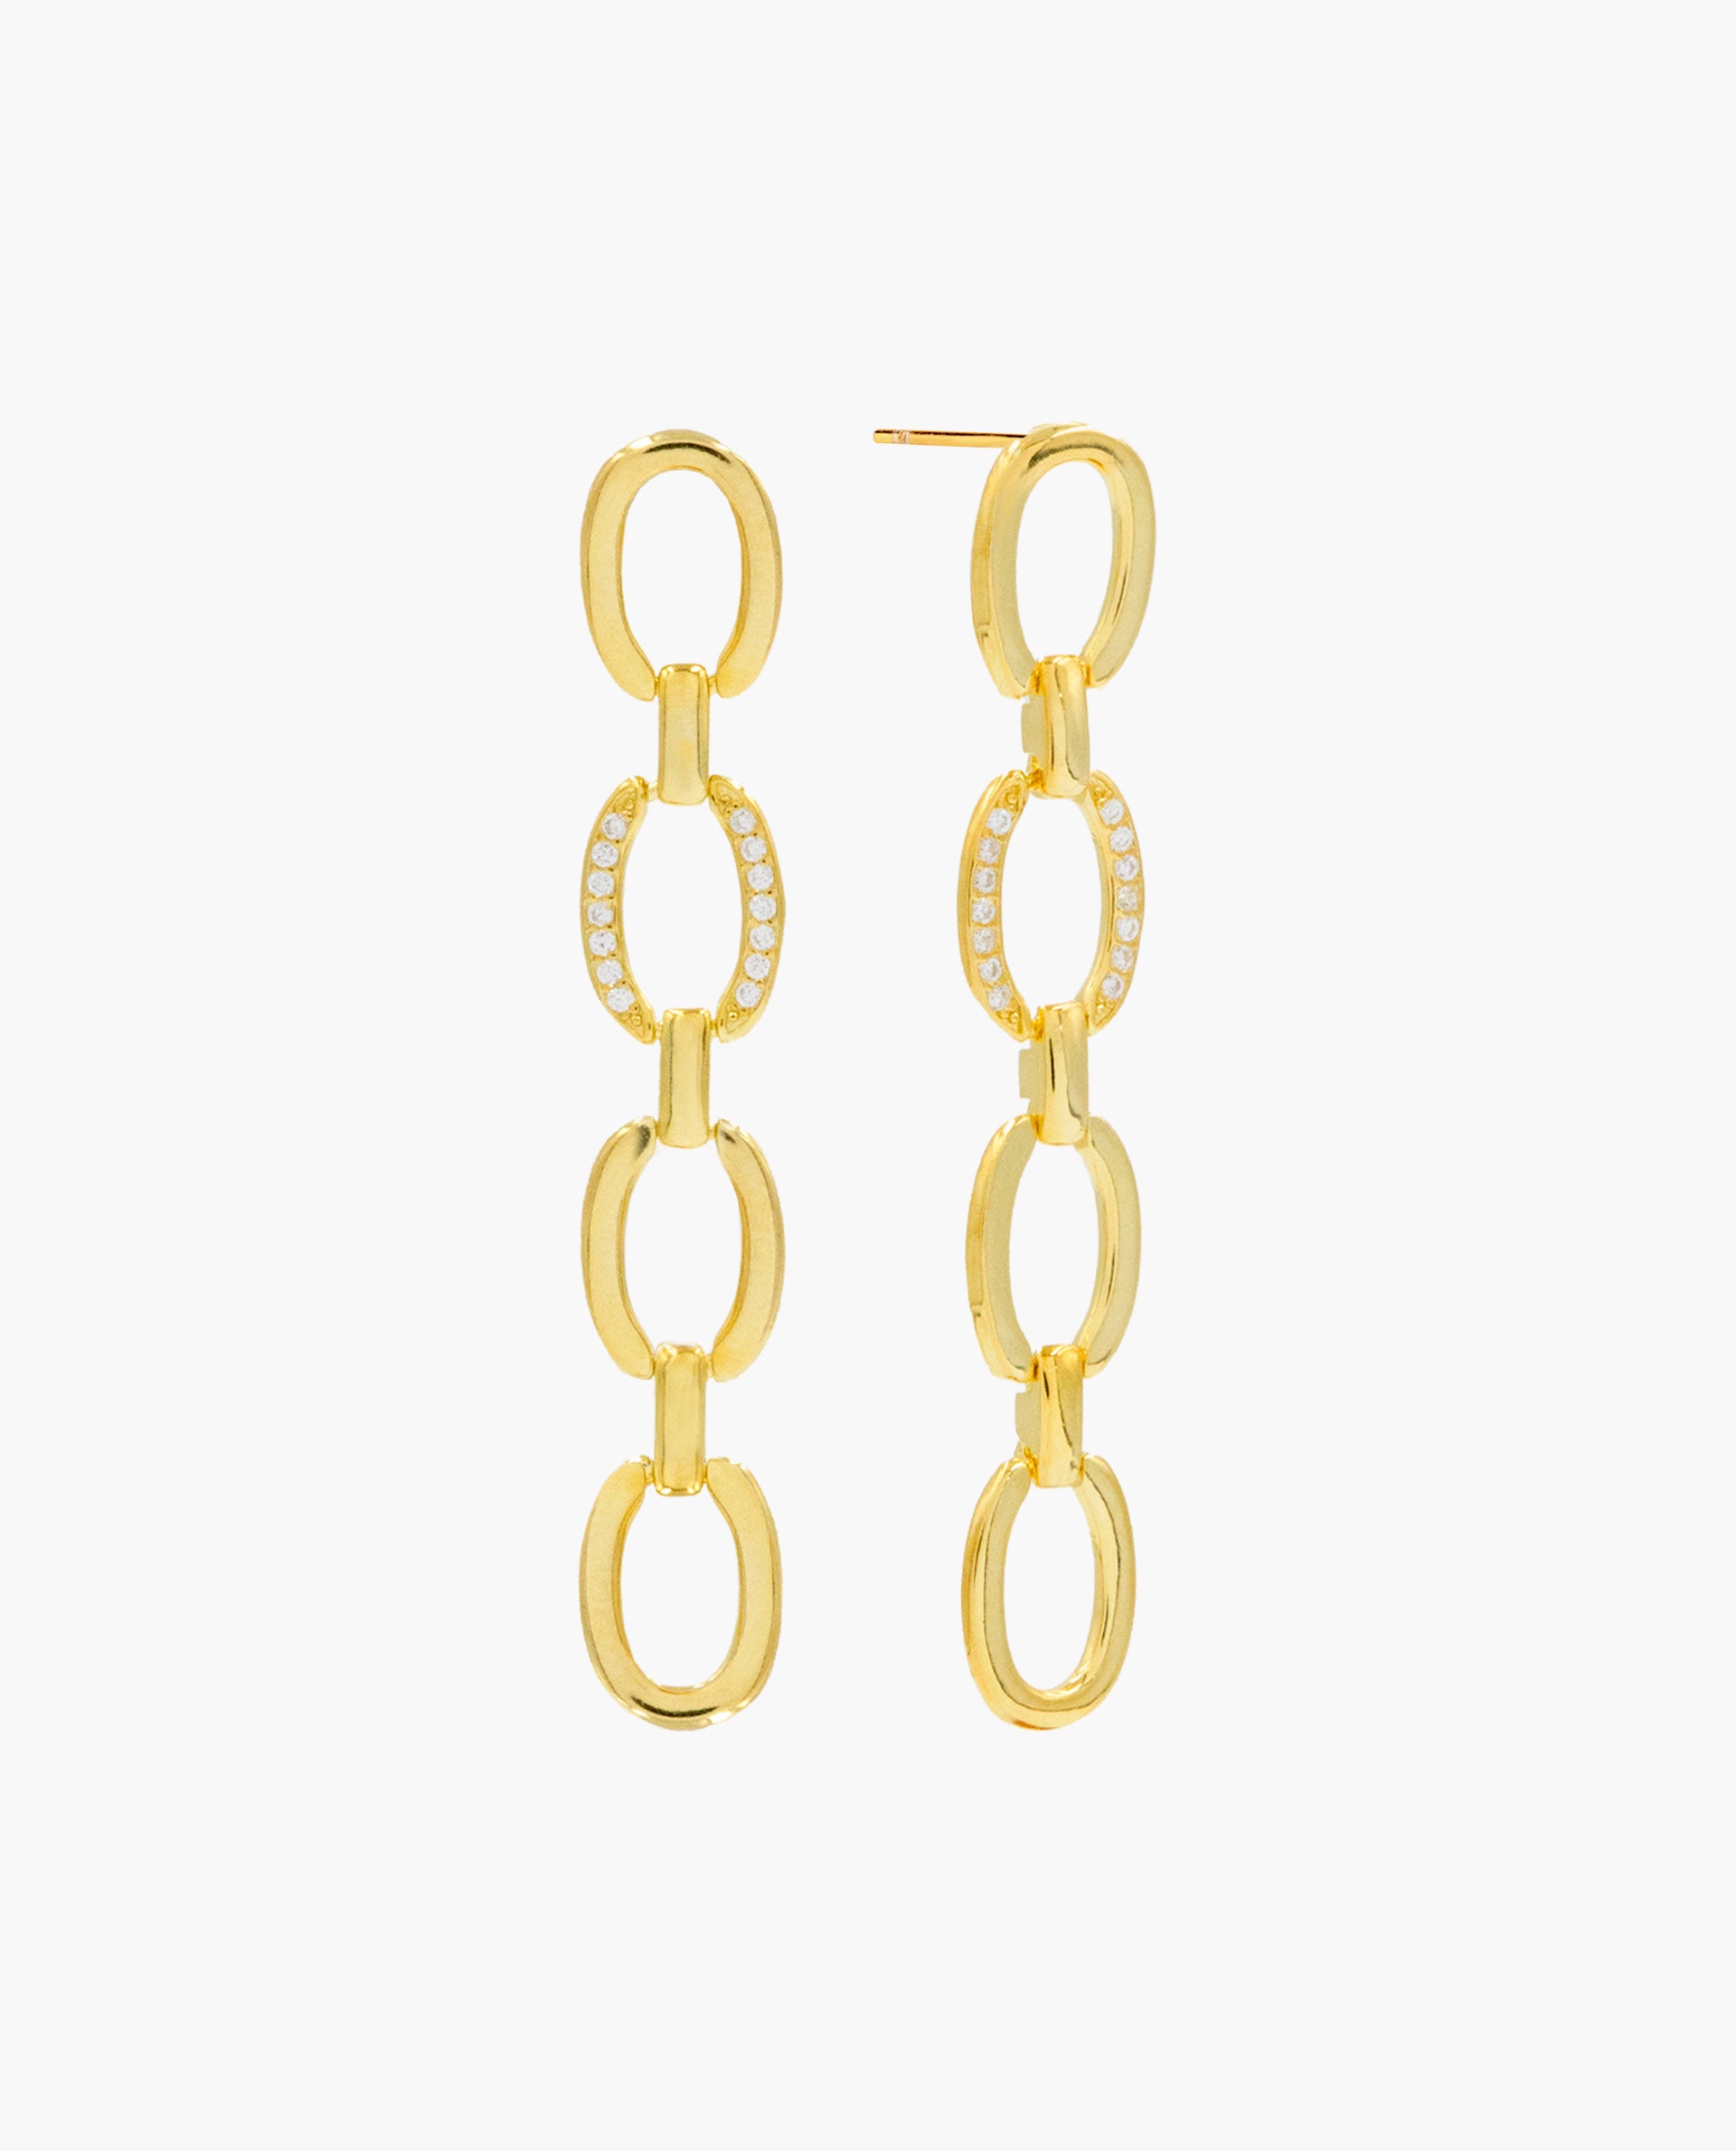 DANGLE CHAIN EARRINGS - GOLD PLATED SILVER